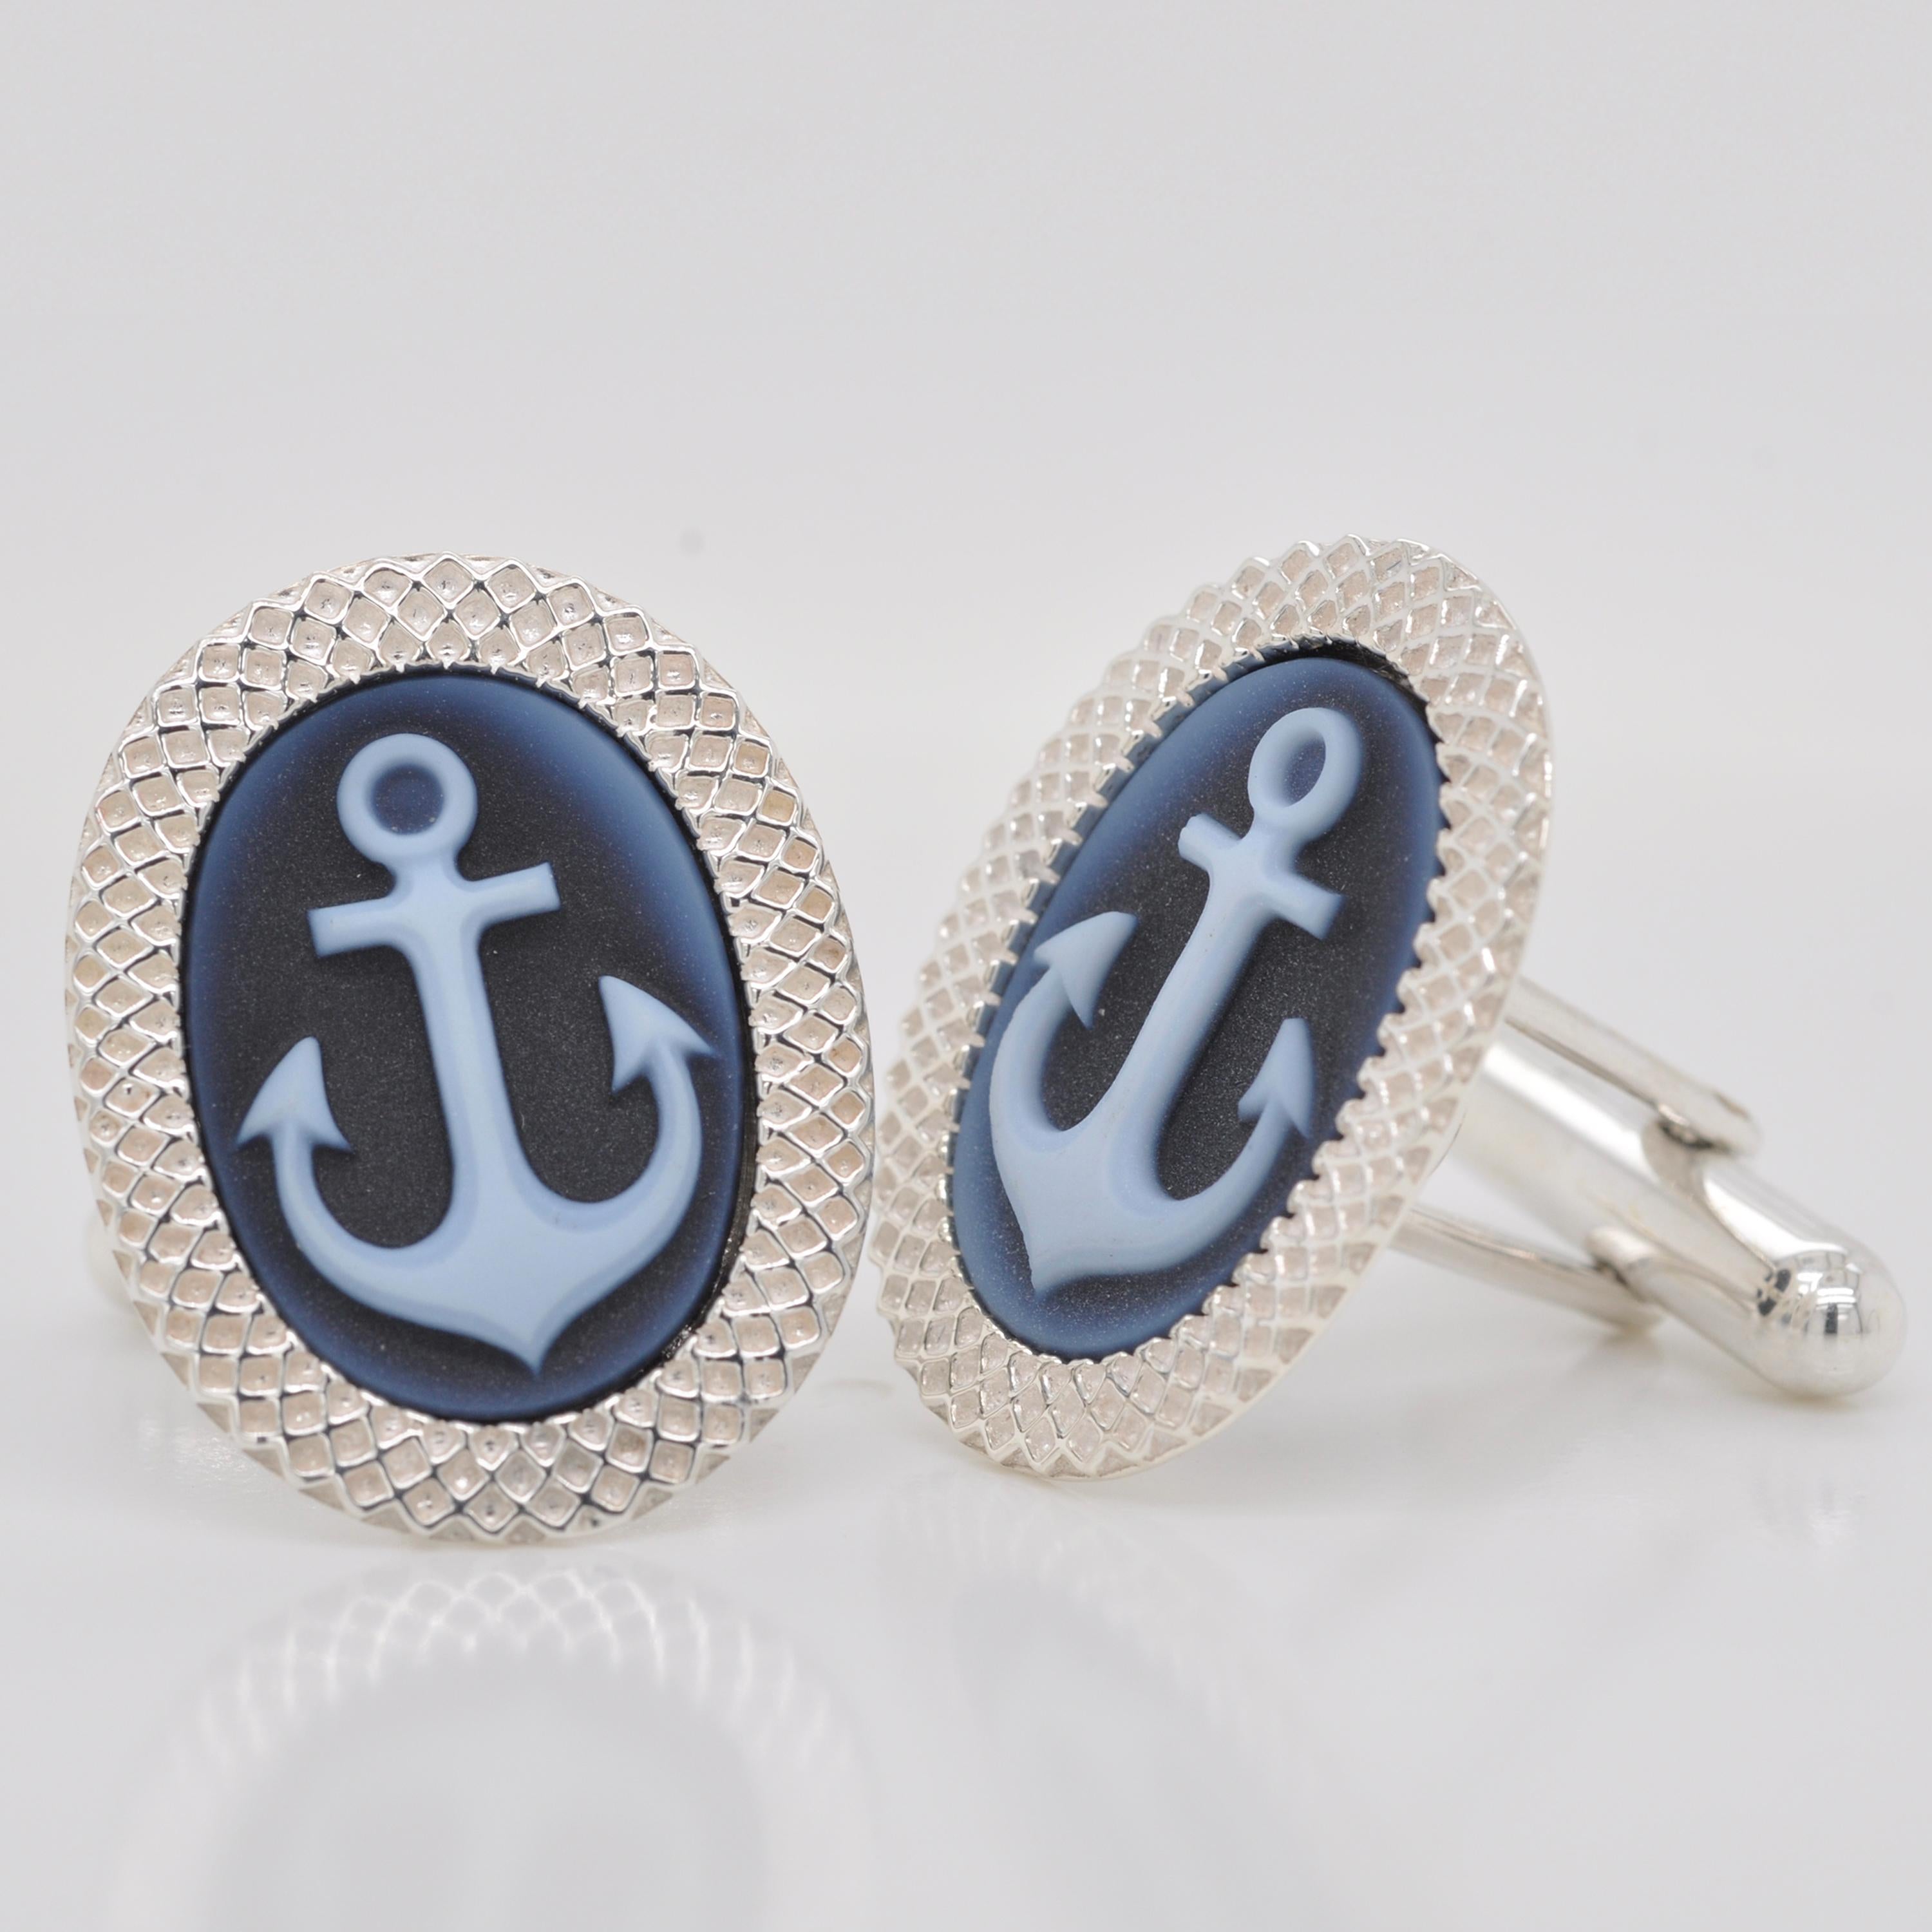 925 sterling silver anchor agate cameo carving cufflinks

These high quality cufflinks exhibit extremely high quality of craftsmanship. On the relief of Natural agate, the anchor is carved outside for a three dimensional effect. The remarkable level